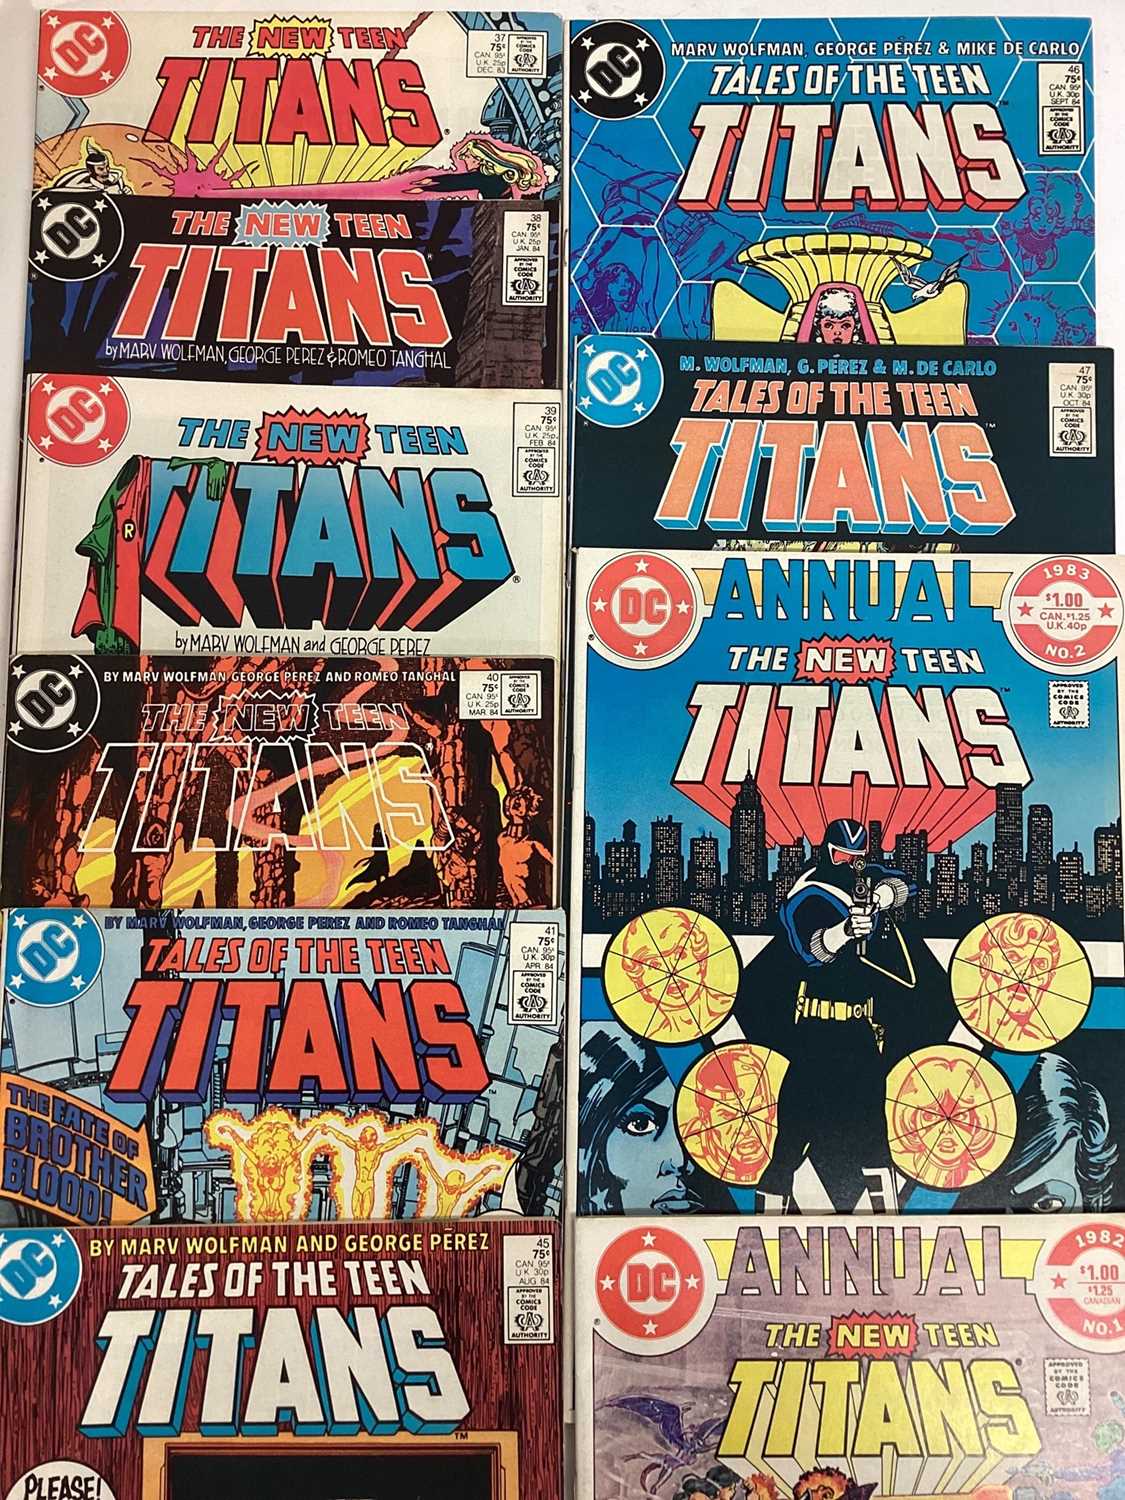 Large quantity of 1980's DC Comics, The New Teen Titans #1 #3-41 #45-47 together with Two annuals #1 - Image 11 of 12